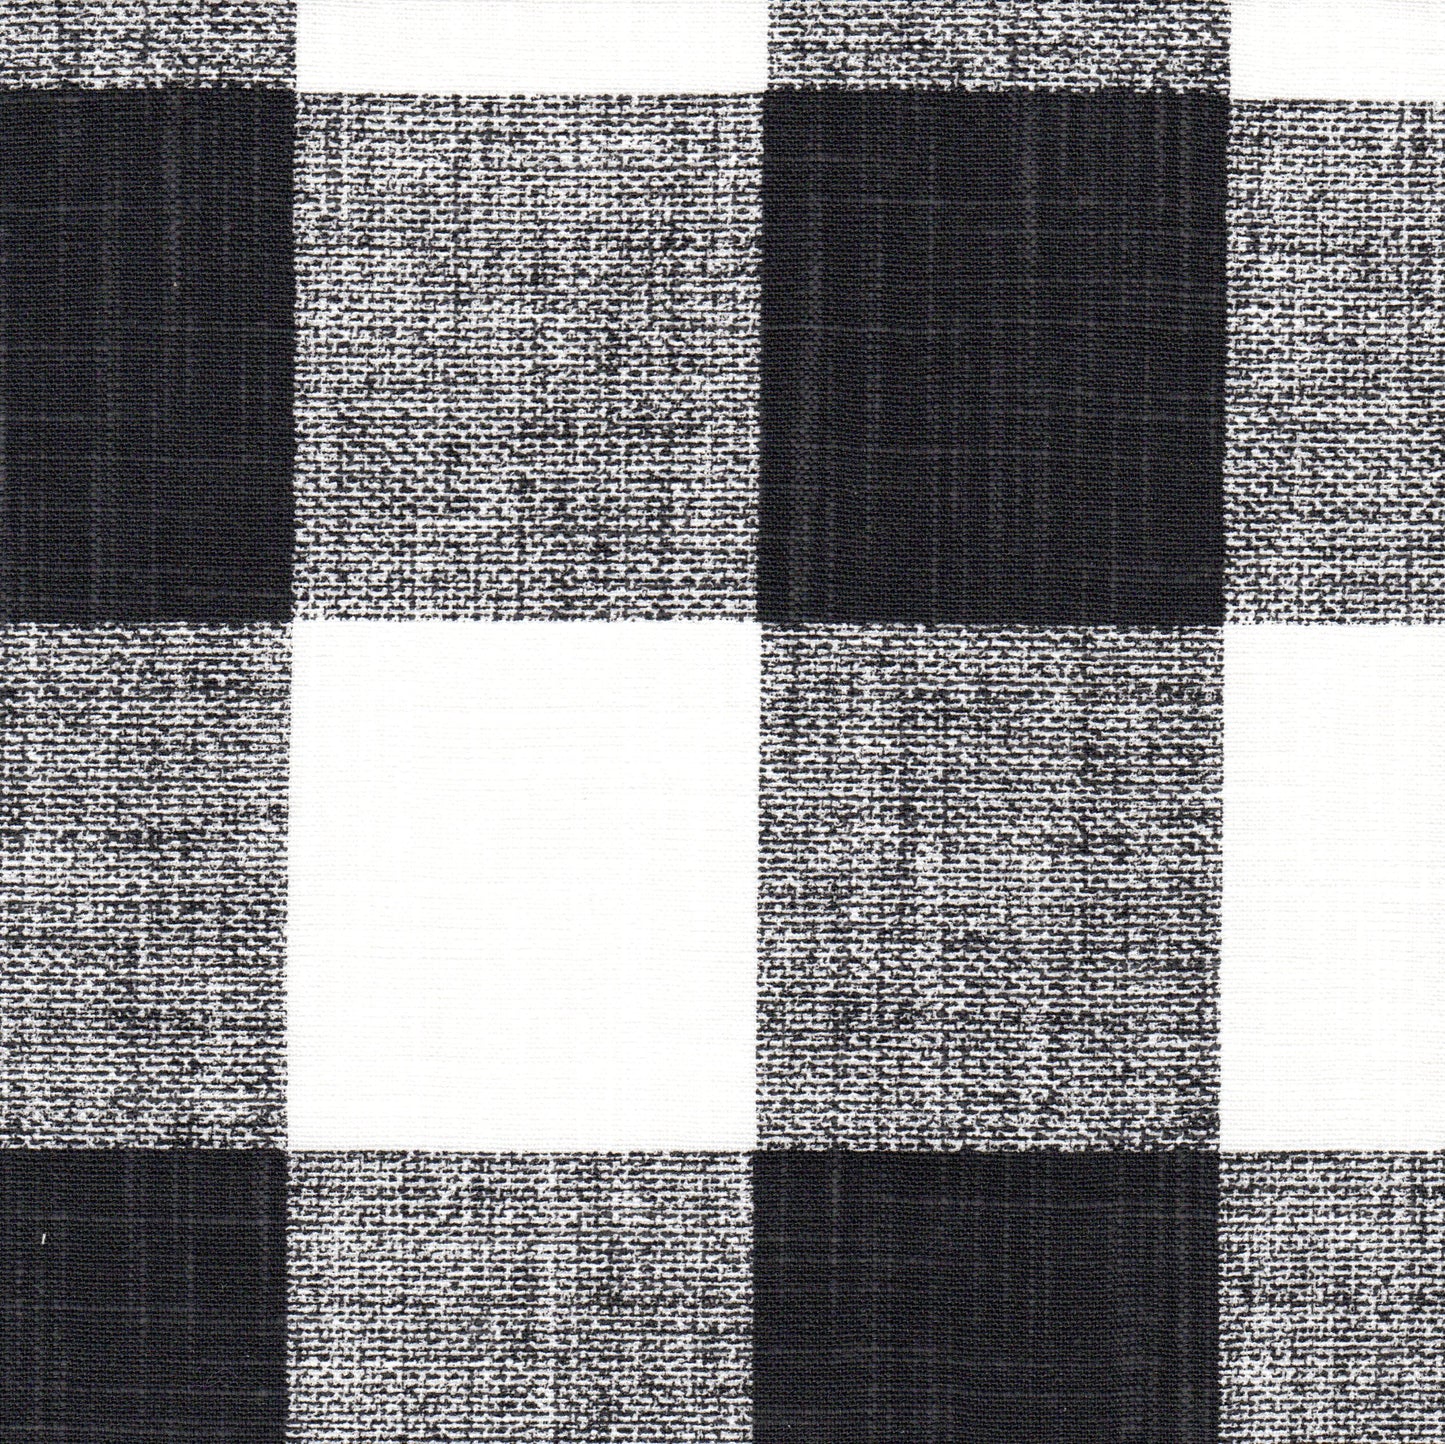 round tablecloth in anderson black buffalo check plaid